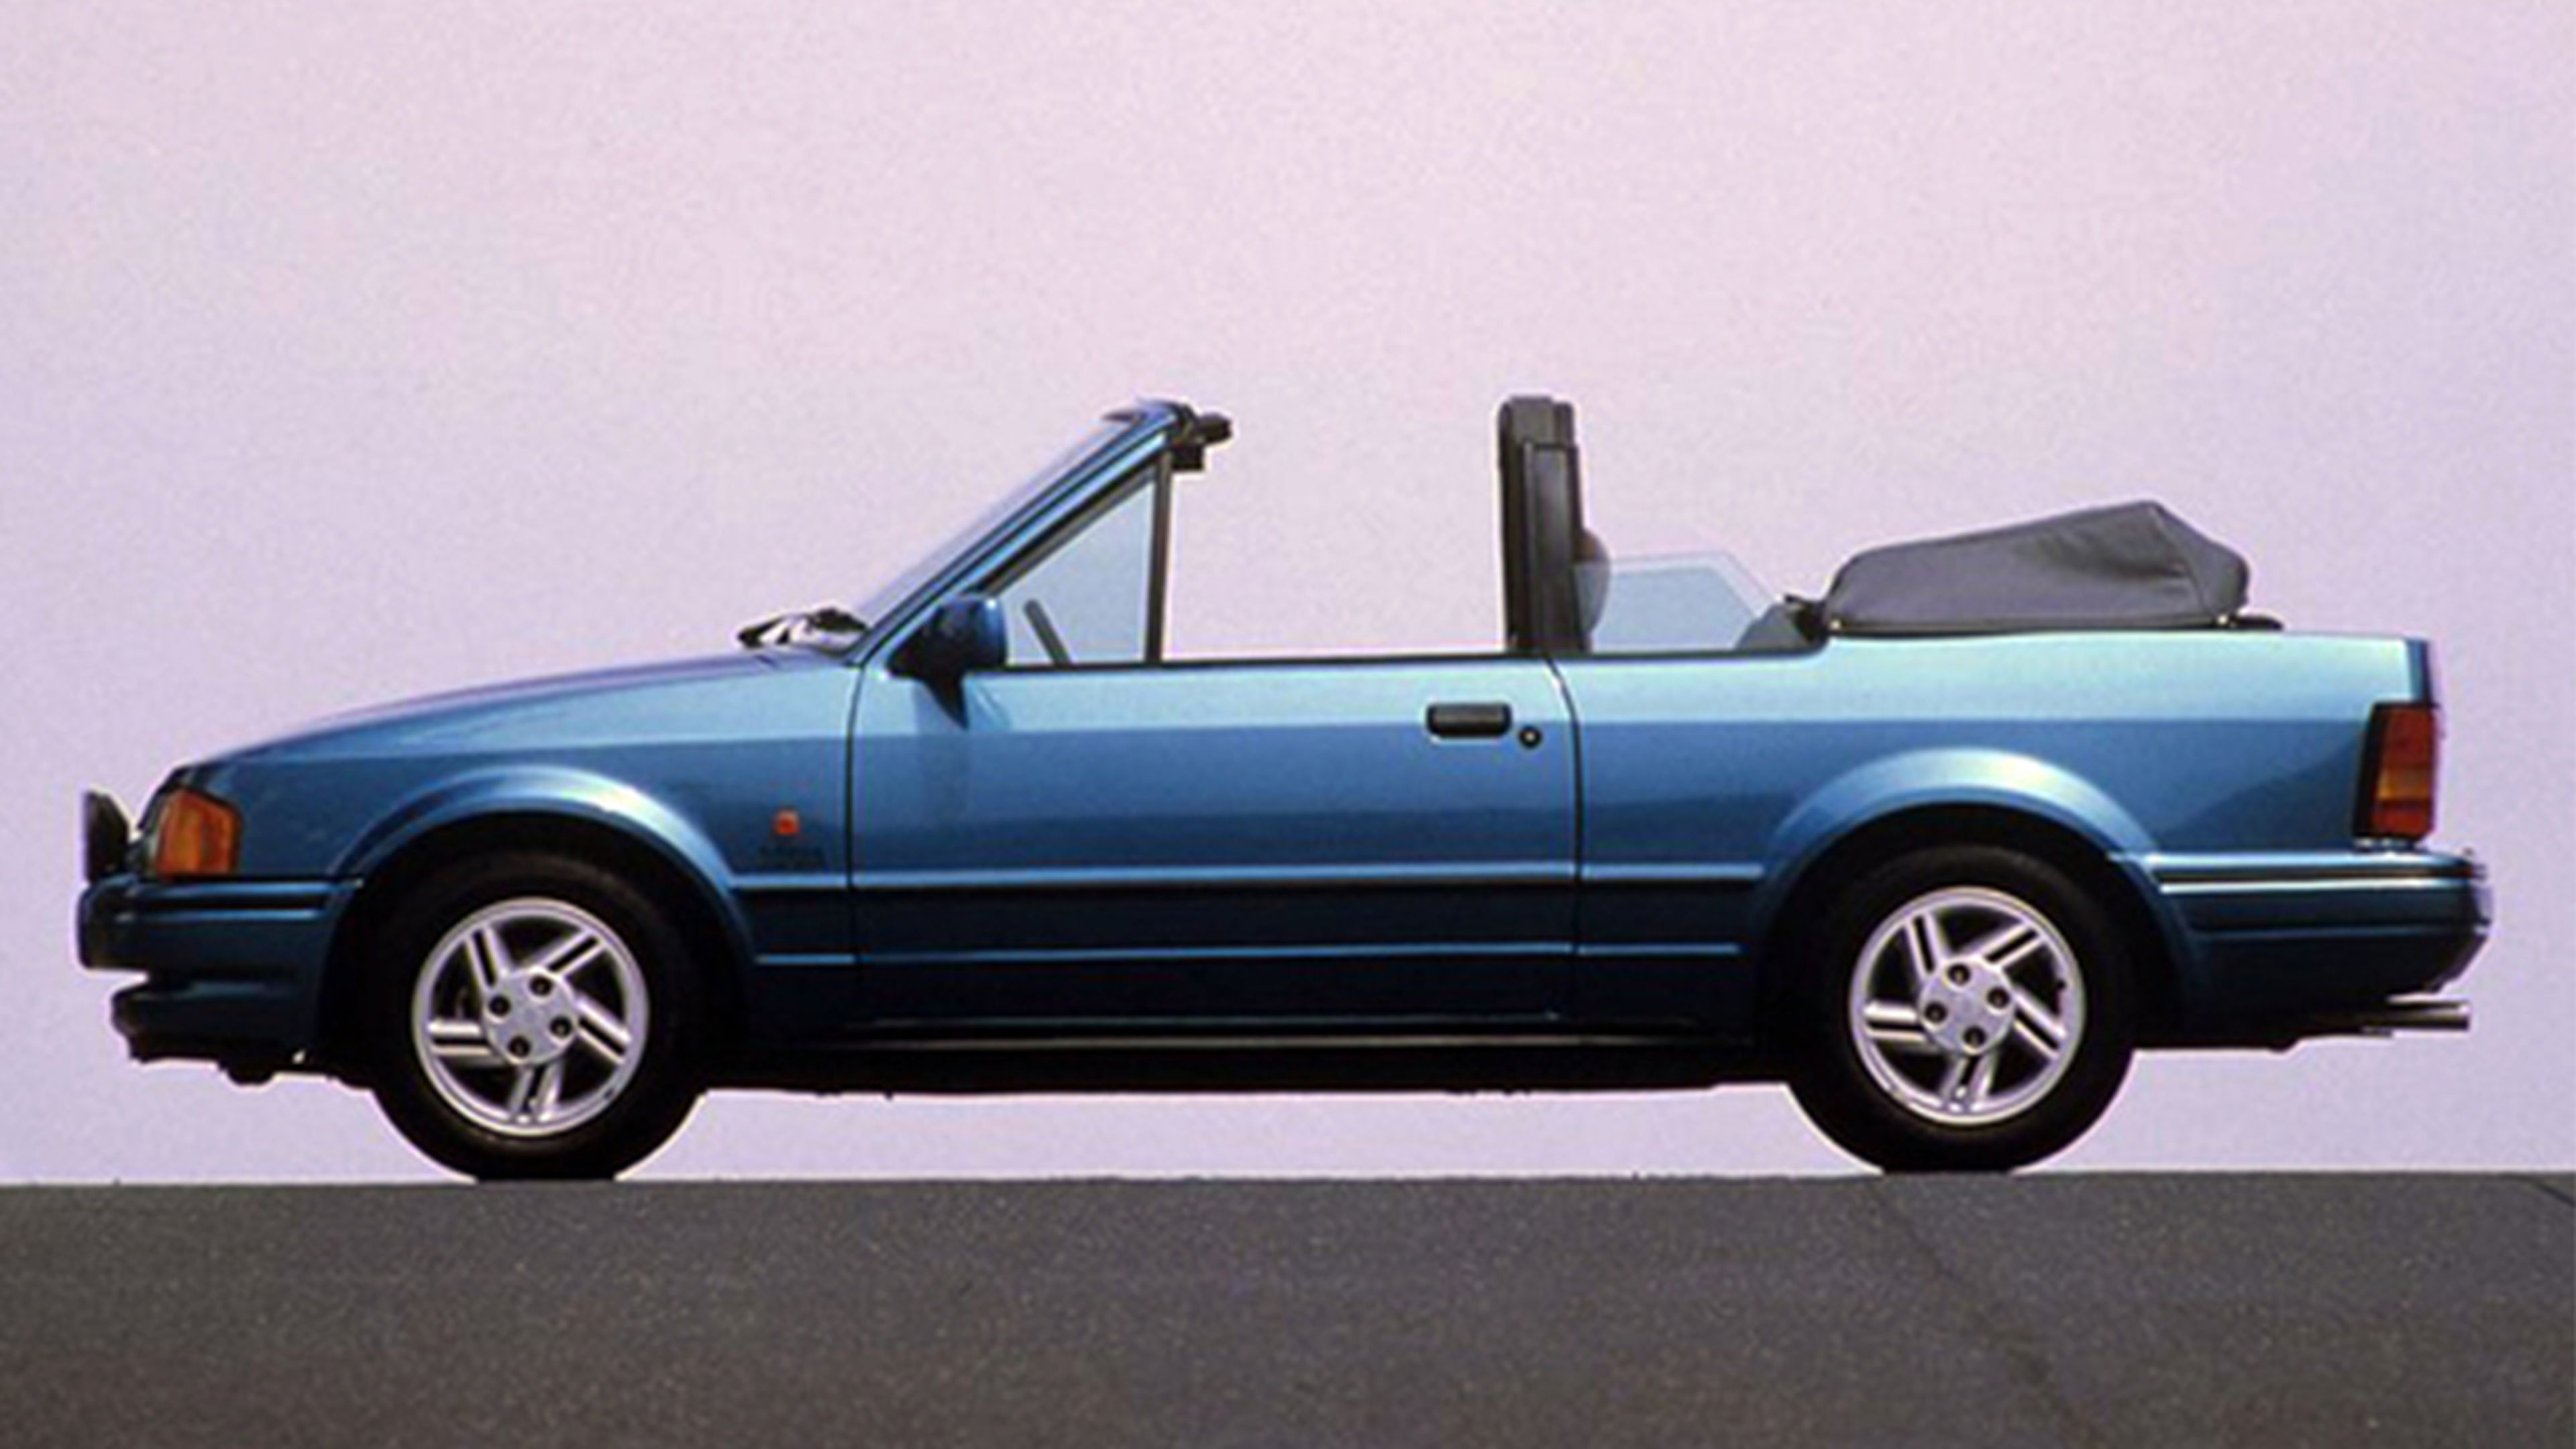 Ford Escort XR3 lateral